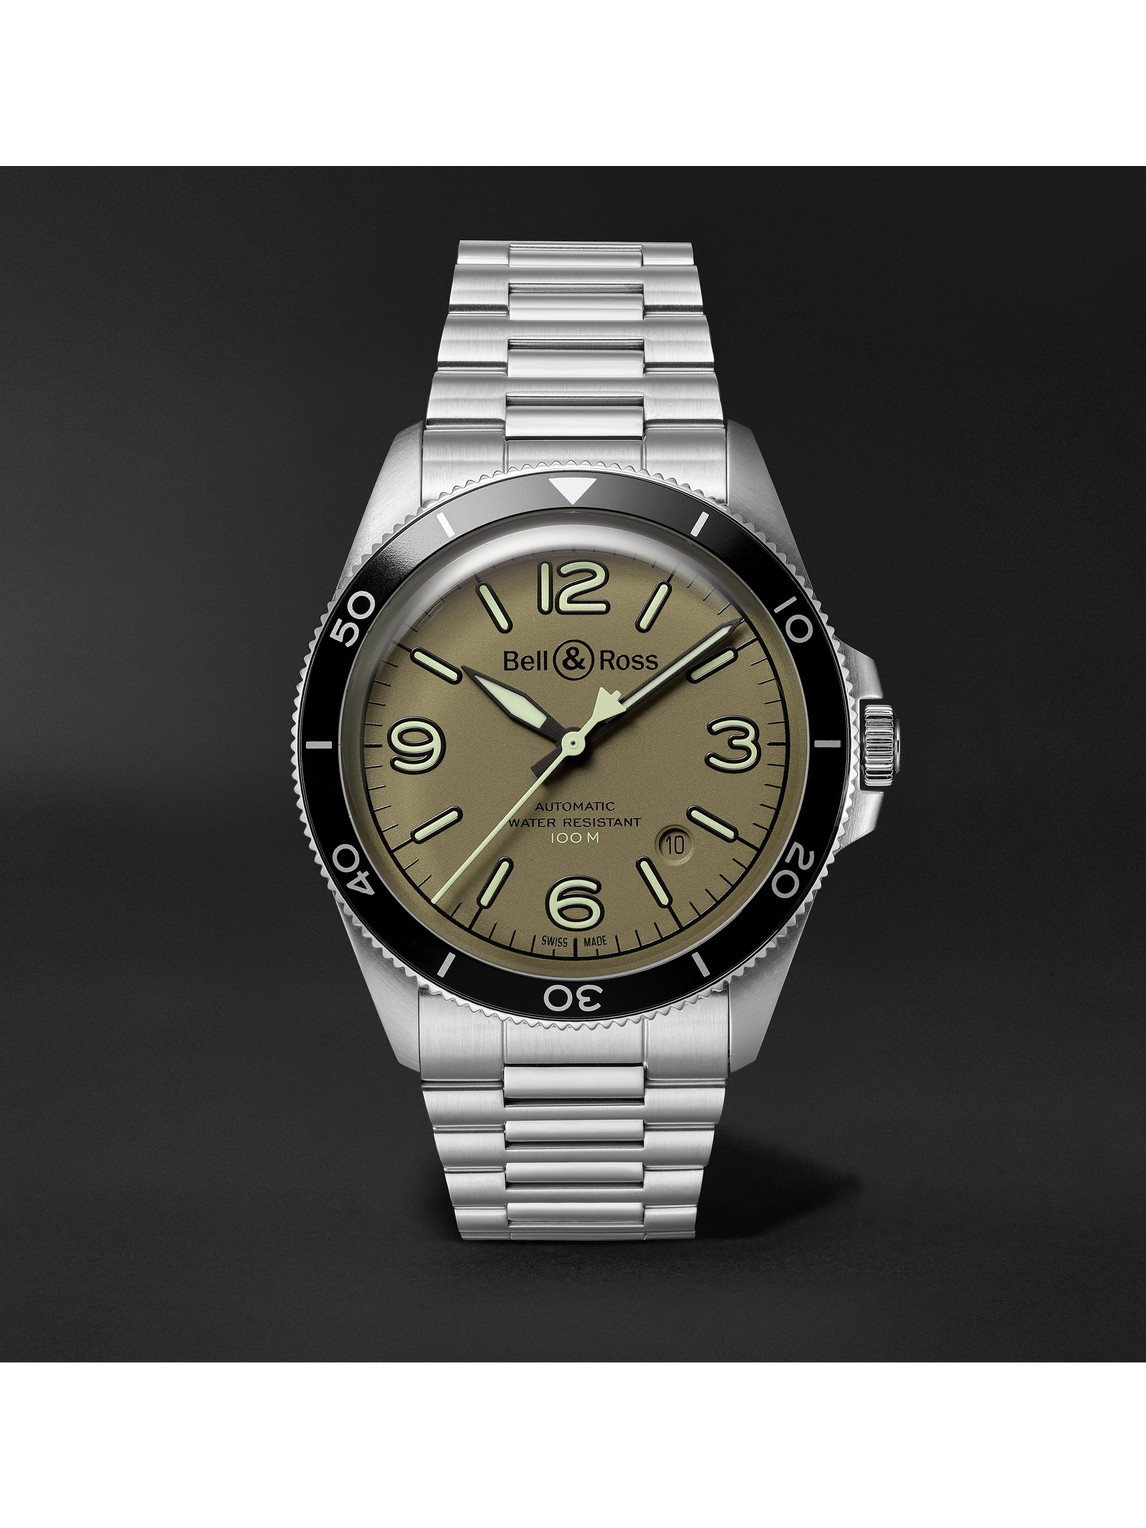 BR V2-92 Military Green Automatic 41mm Stainless Steel Watch, Ref. No. BRV292-MKA-ST/SST